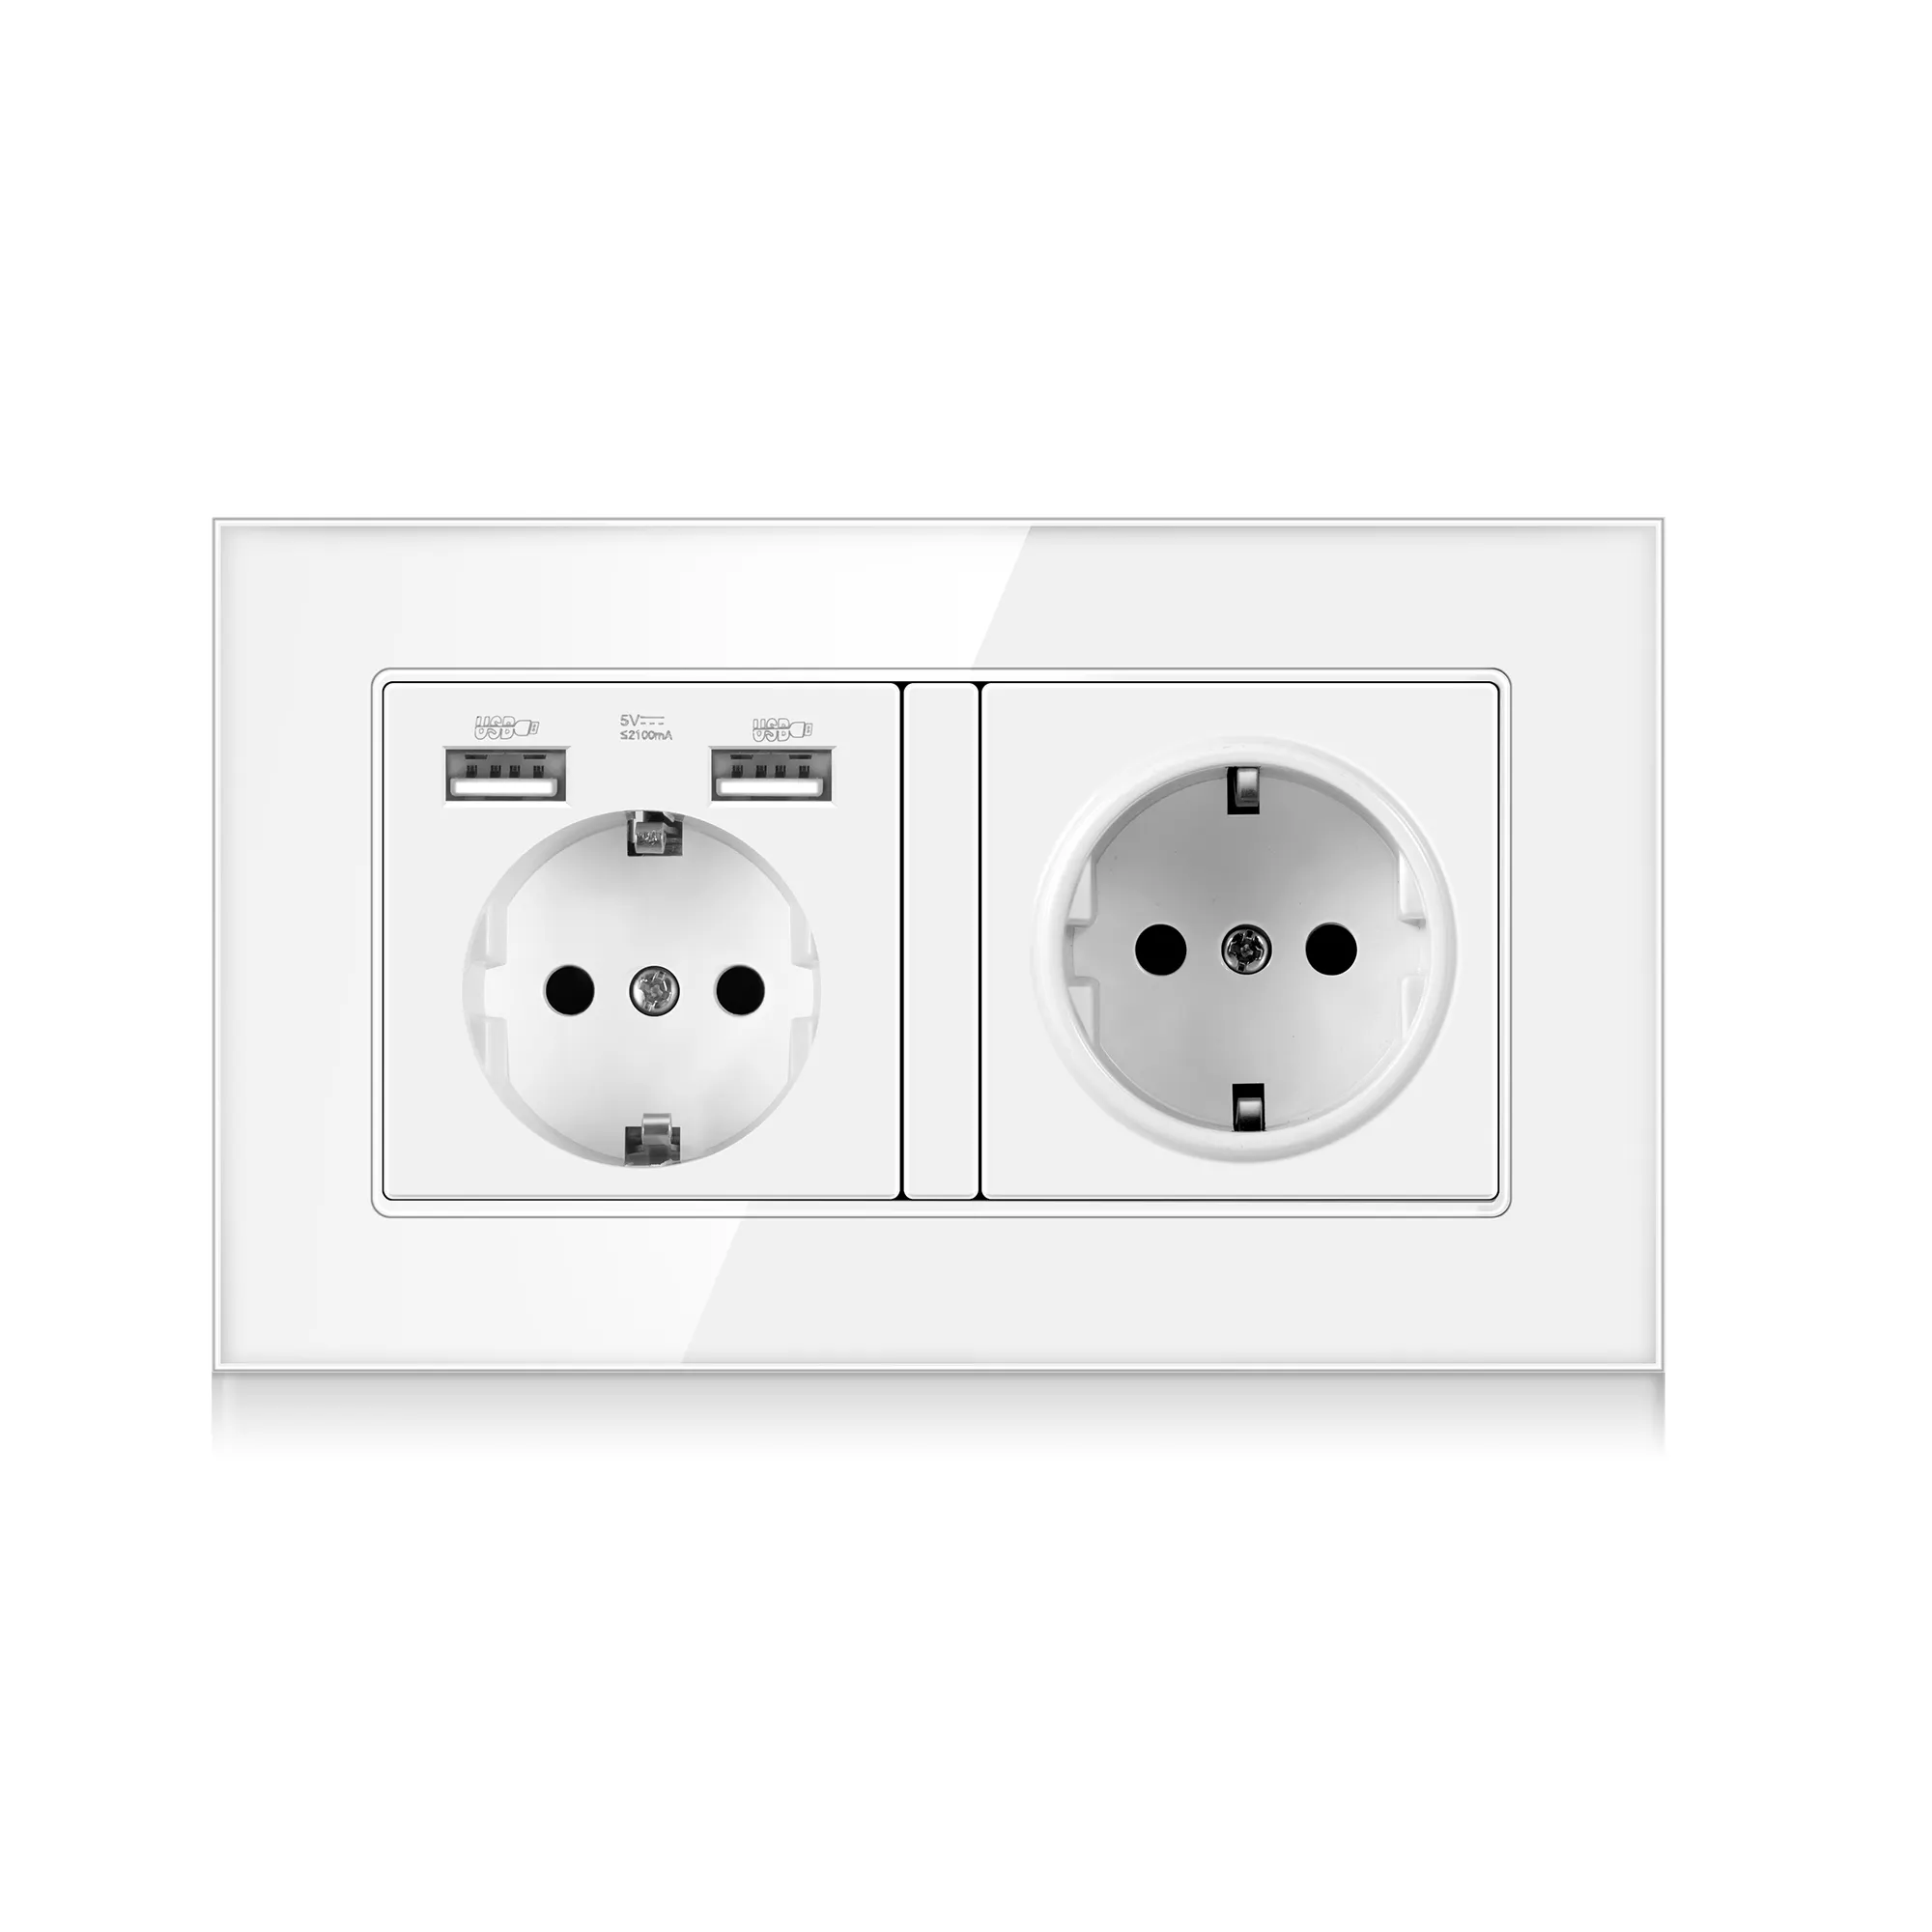 EU Wall power socket,16A electrical plug grounded Hide LED indicator ,double socket with usb